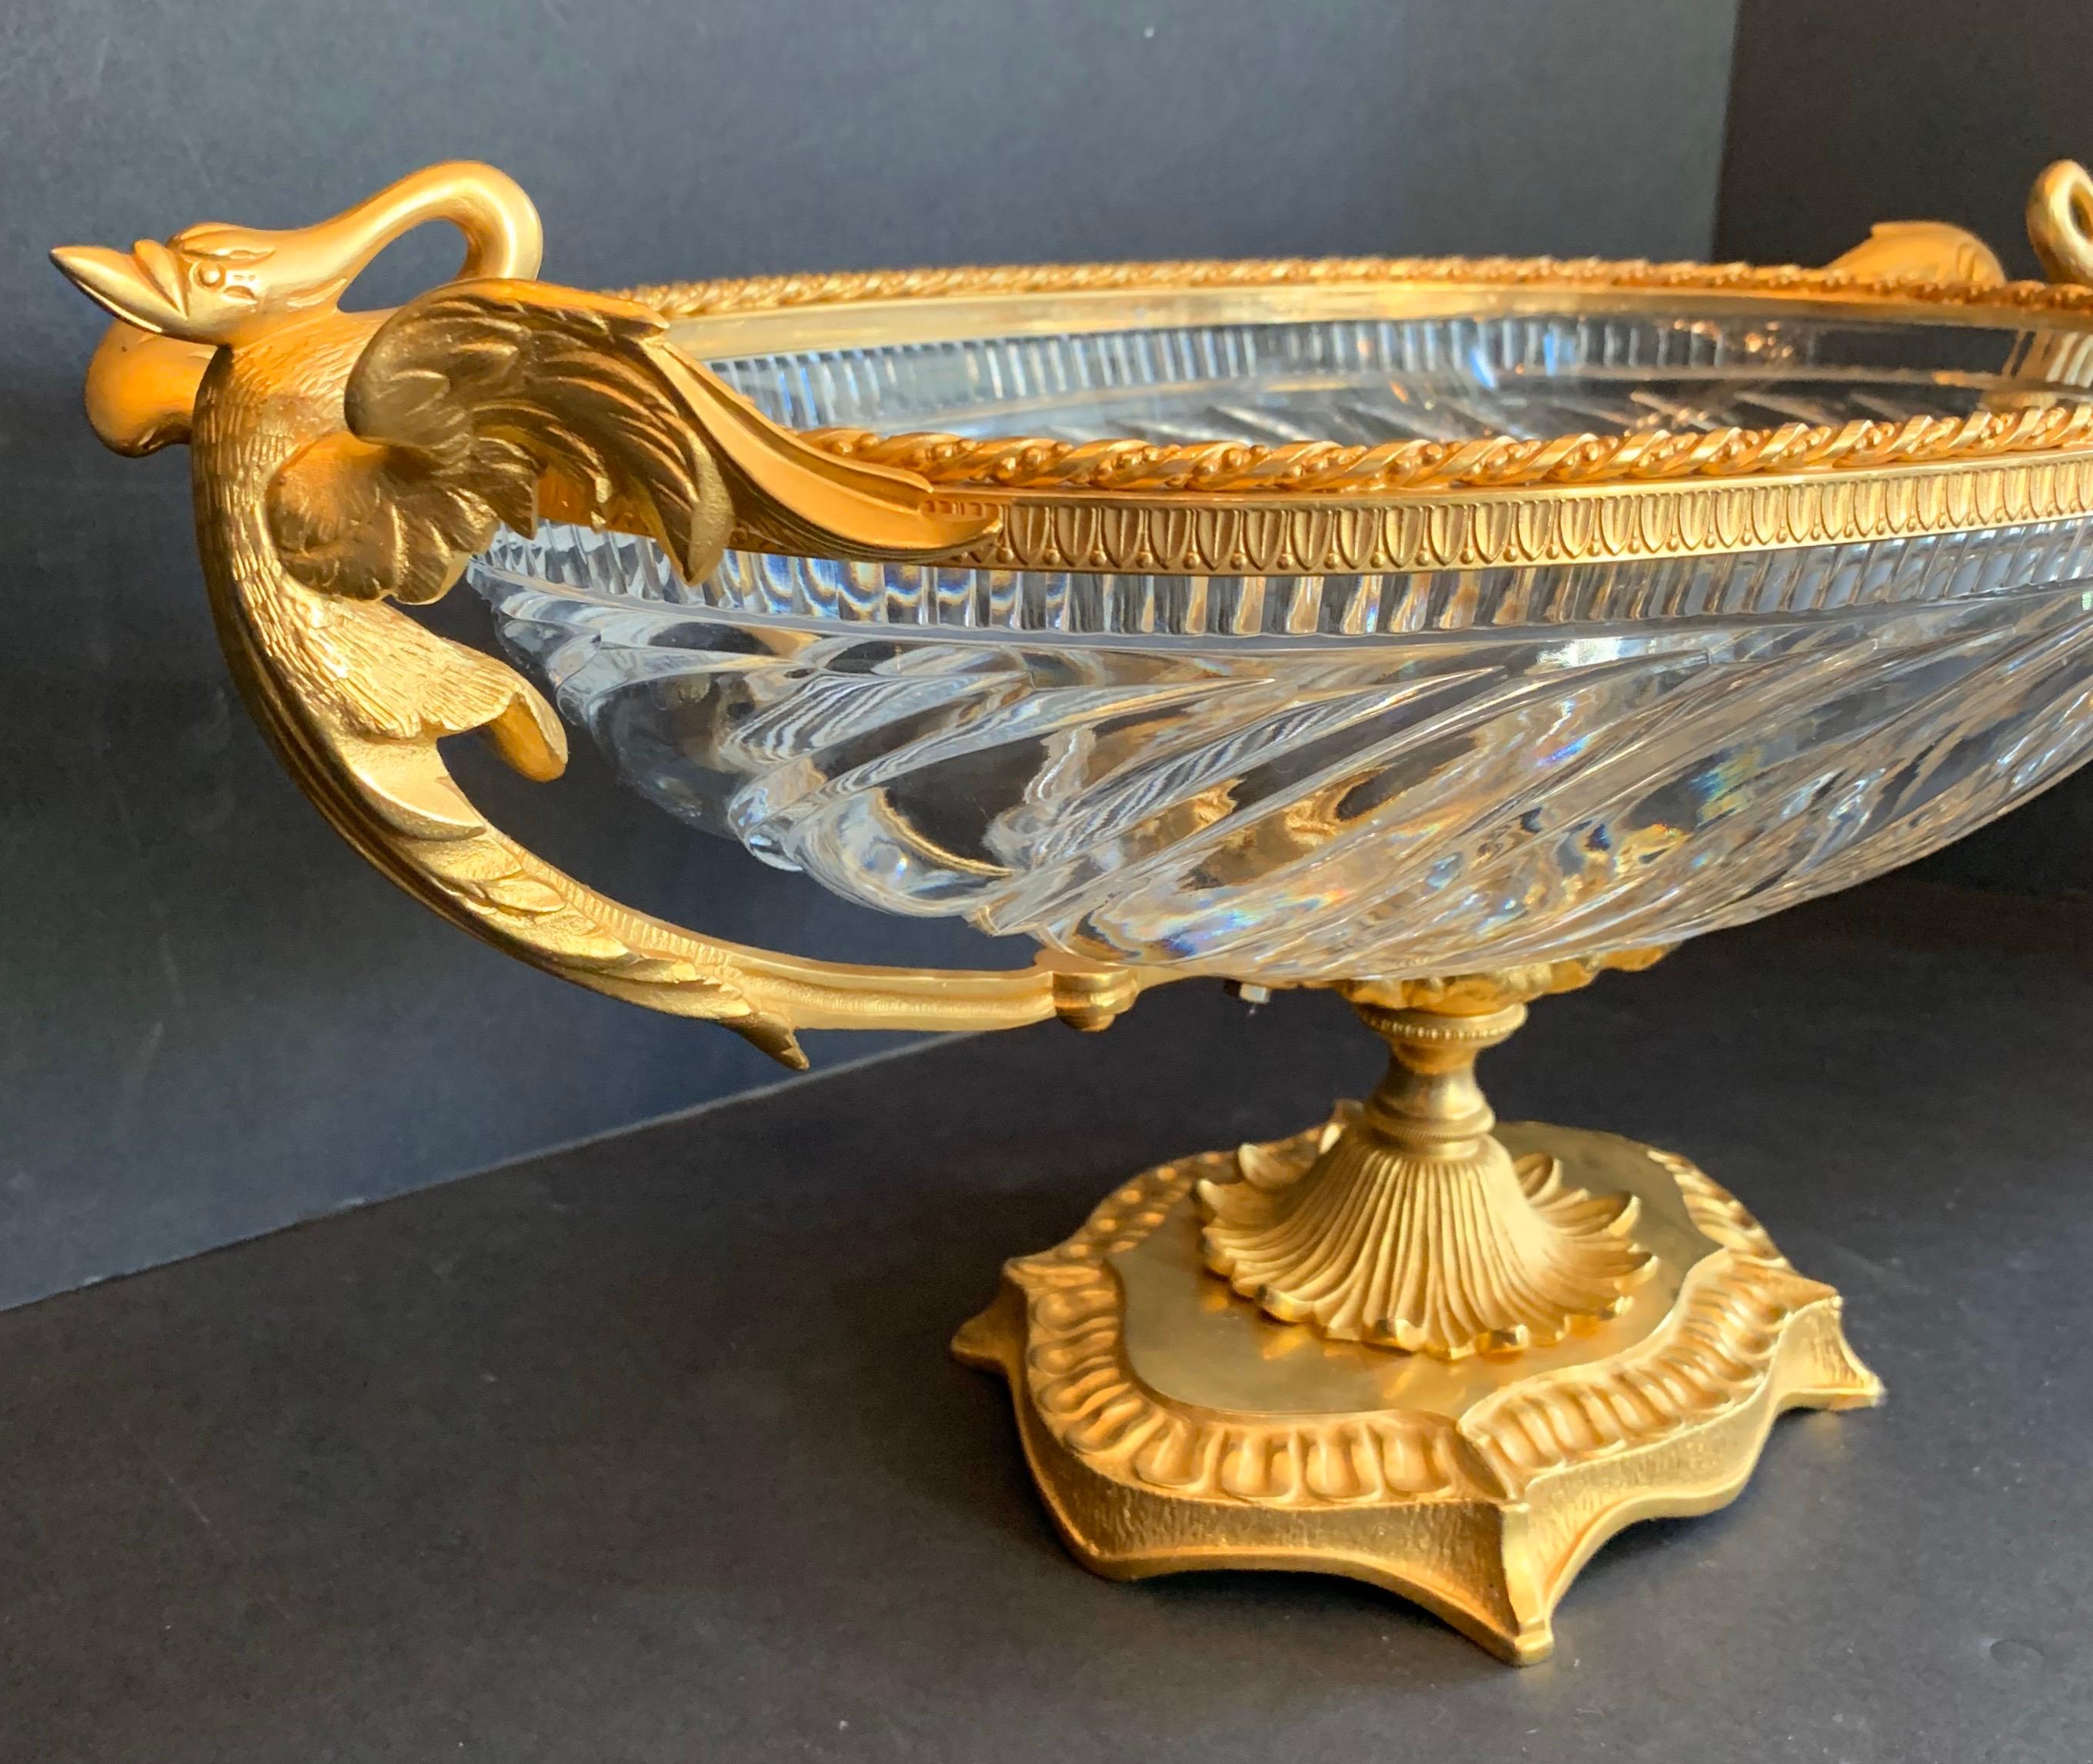 A wonderful French gilt doré bronze swan handle ormolu and cut crystal centerpiece, in the manner of Baccarat.